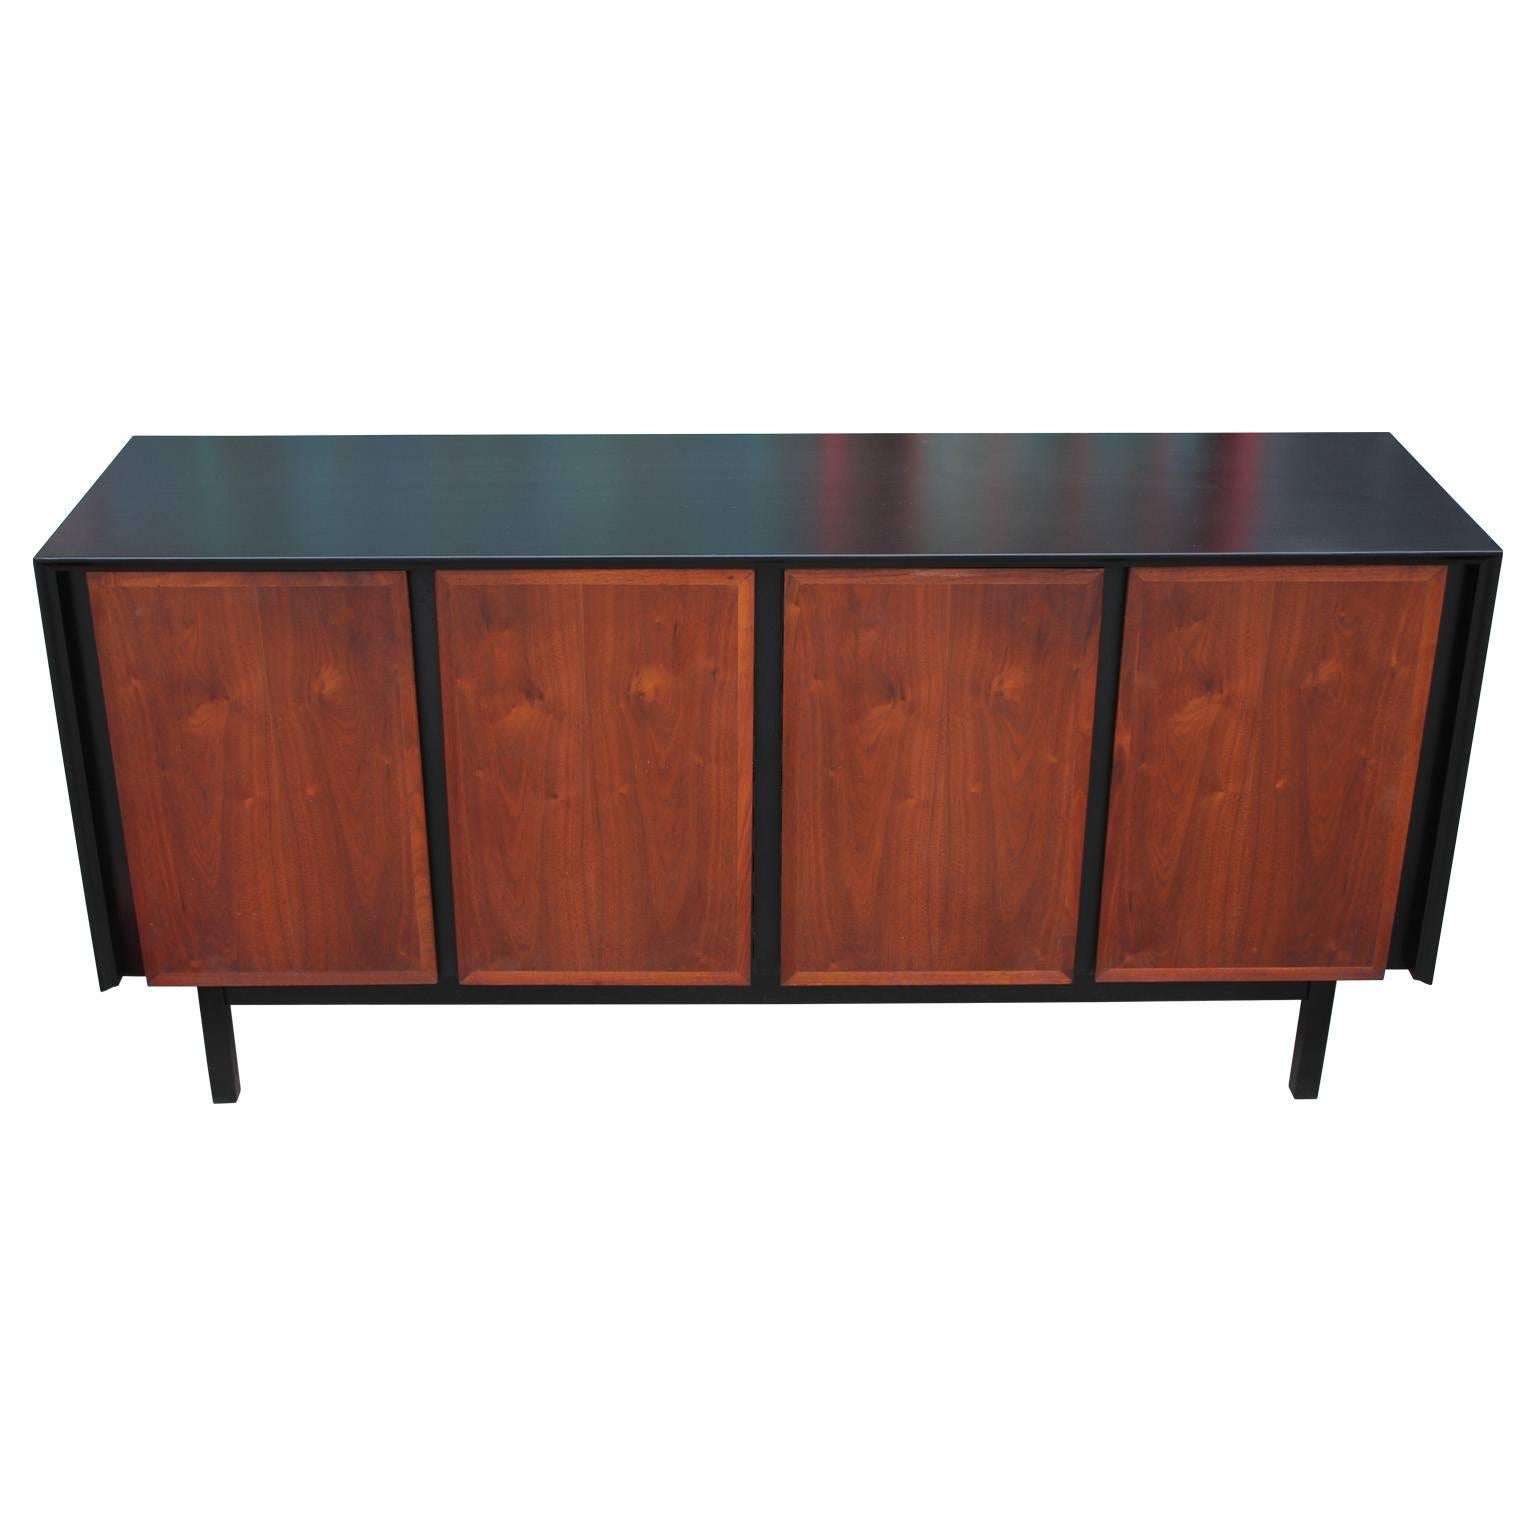 Sleek Mid-Century sideboard or credenza. Sideboard is freshly refinished with an ebonized case and walnut door fronts. Two doors open to three white drawers while the other two doors open to a single shelf.